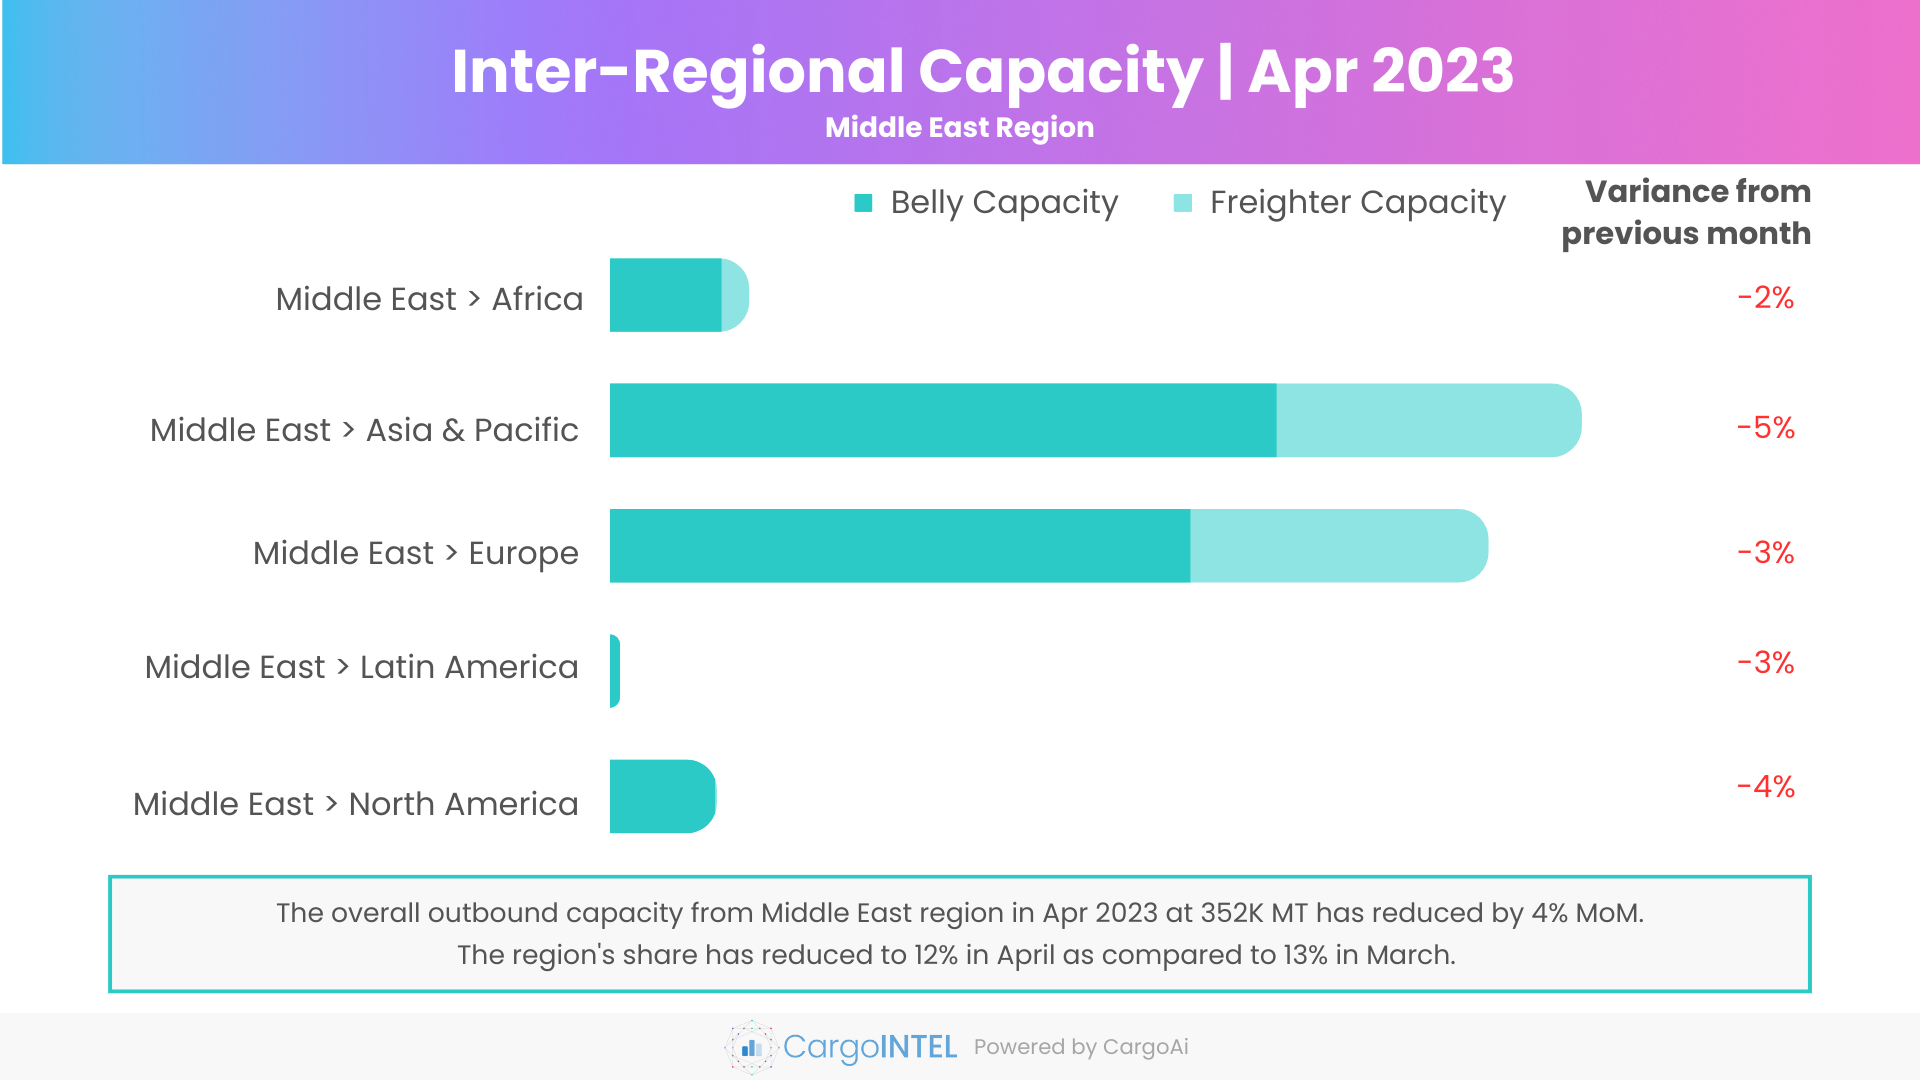 Air cargo capacity of Middle East region of Apr 2023